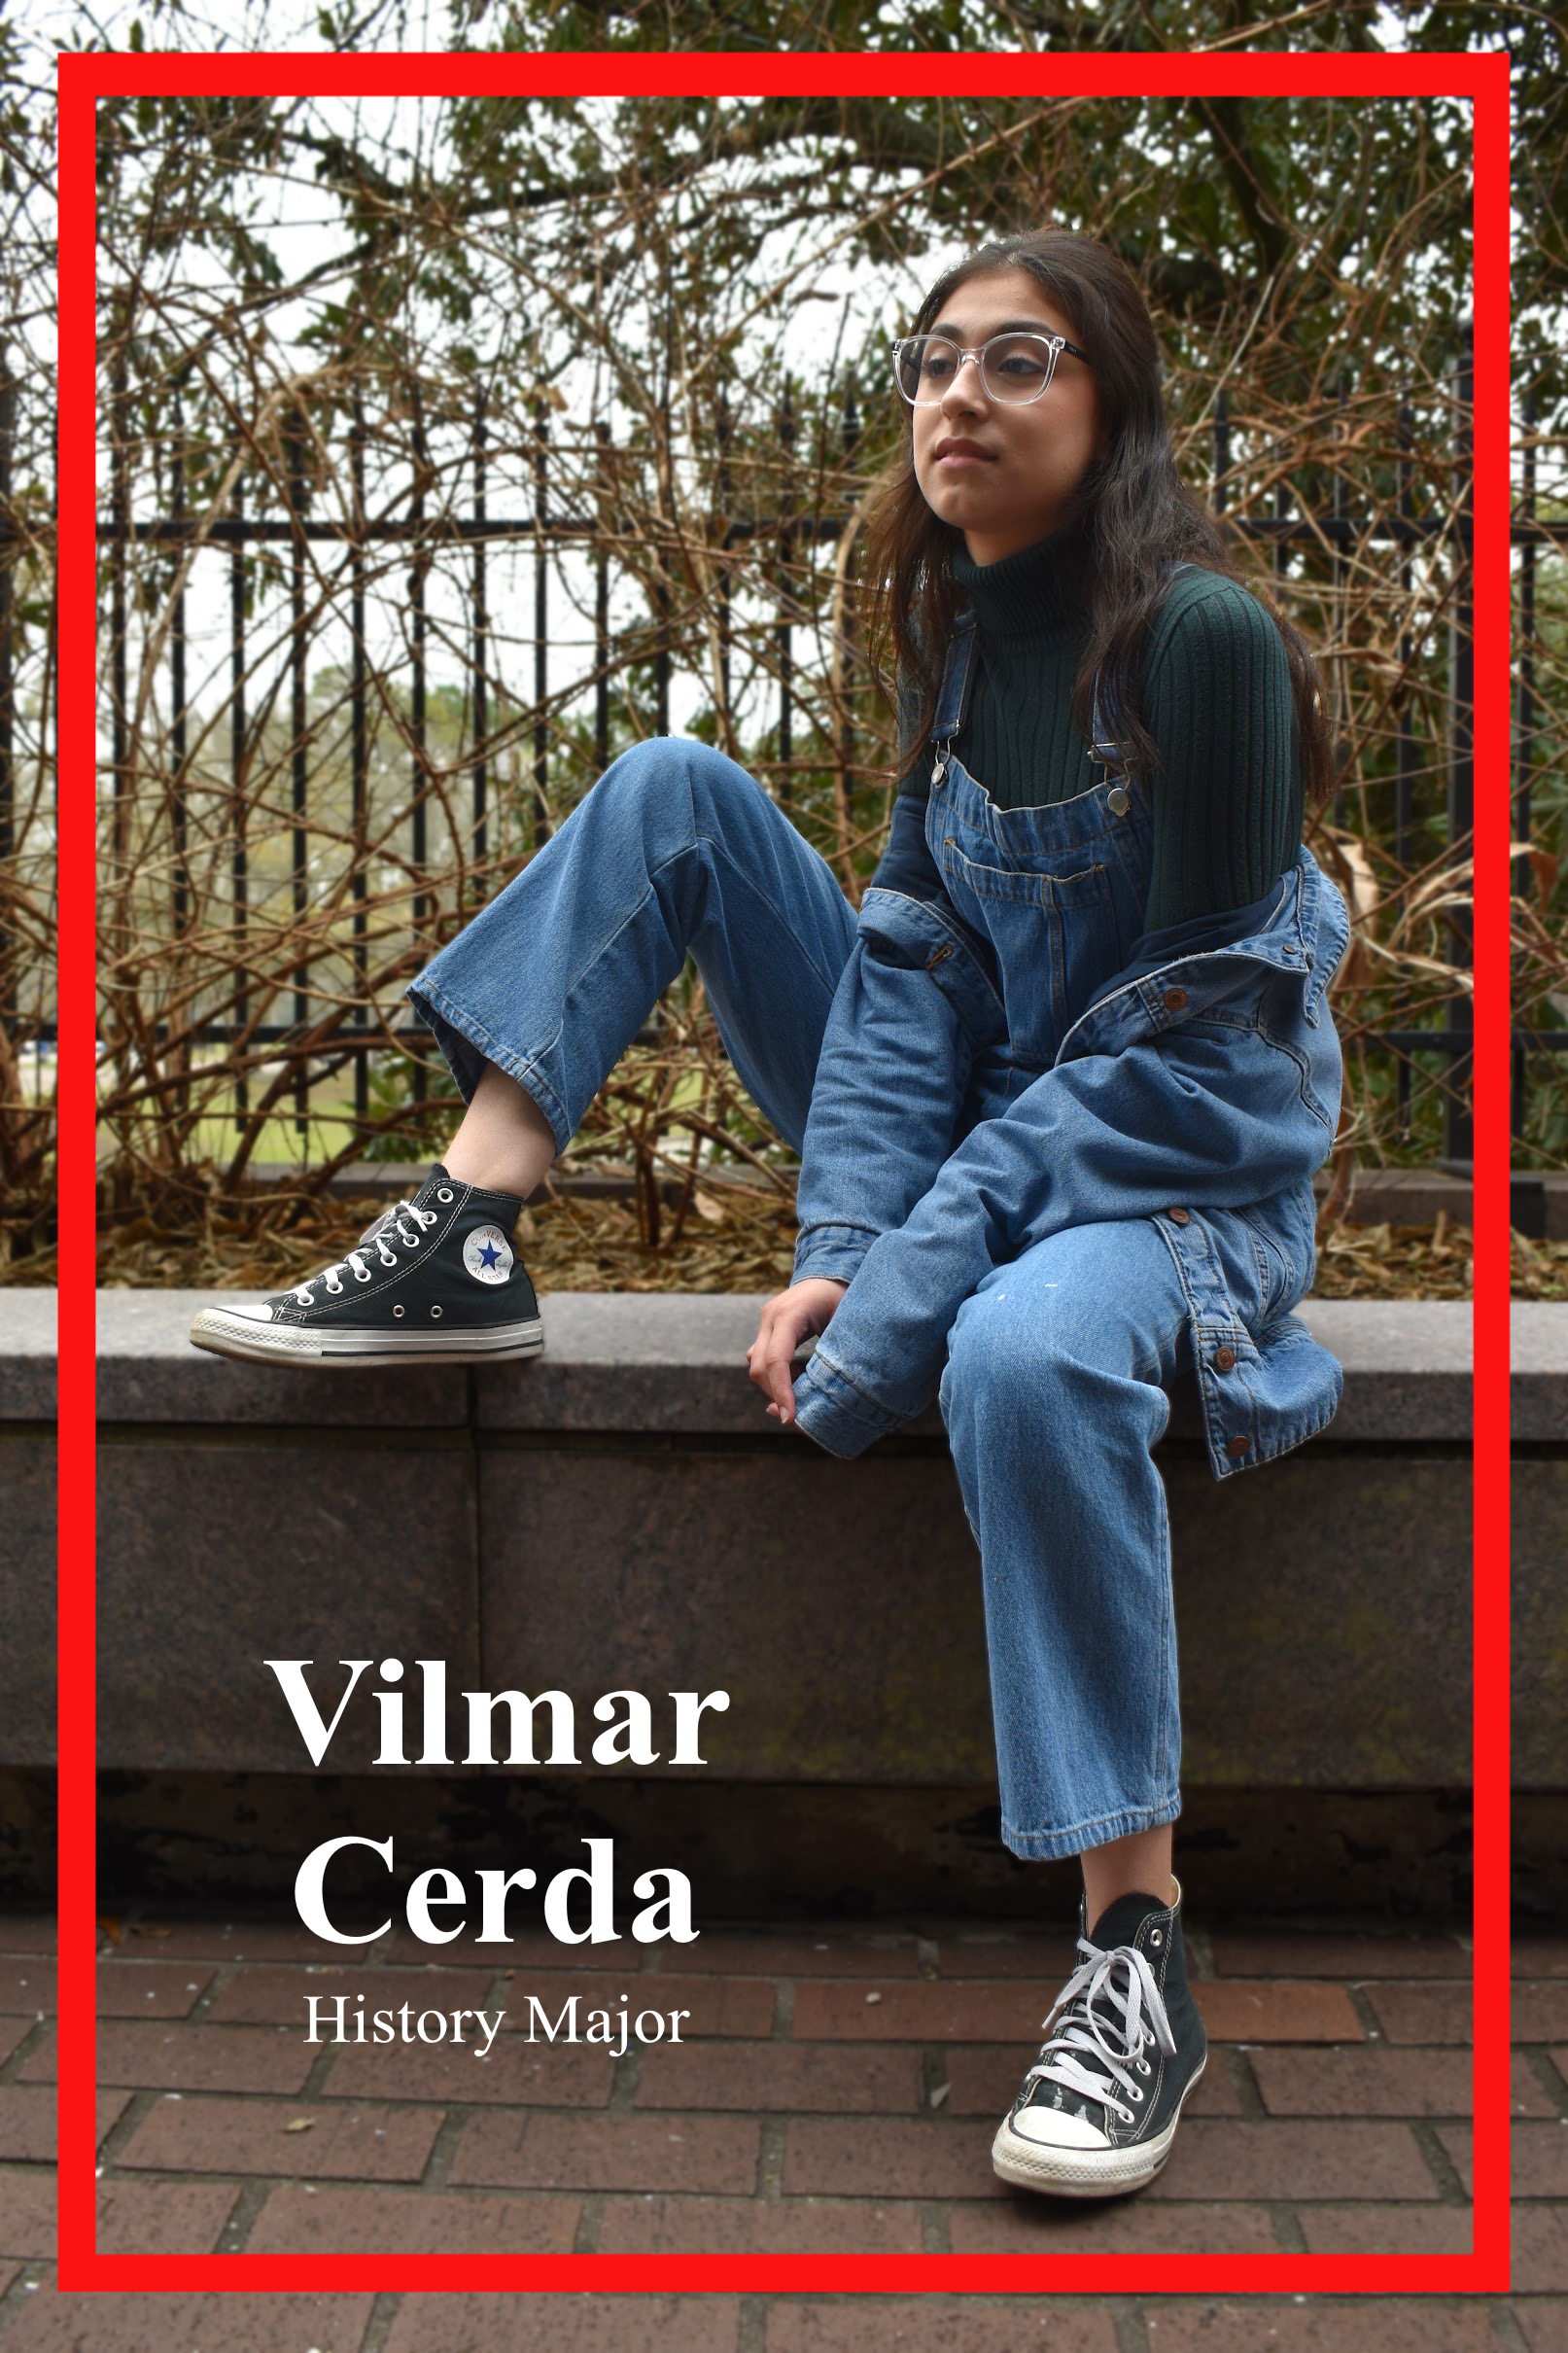 Vilmar Cerda, History Major, posed on a ledge dressed in all denim overalls and jacket, paired with a forest green turtleneck and black converse.